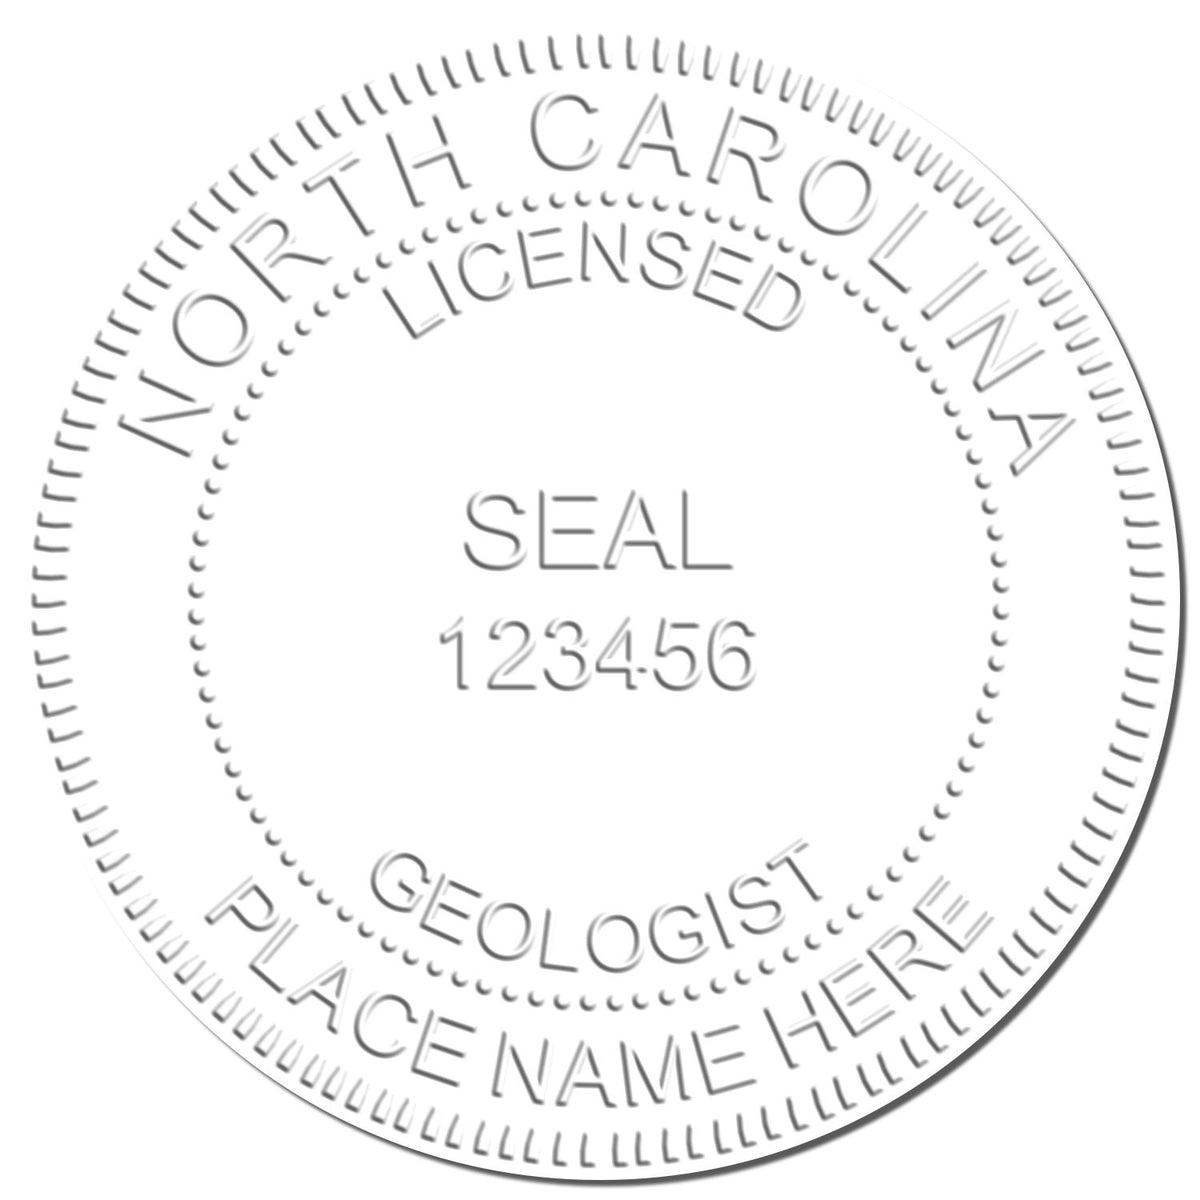 A photograph of the Hybrid North Carolina Geologist Seal stamp impression reveals a vivid, professional image of the on paper.